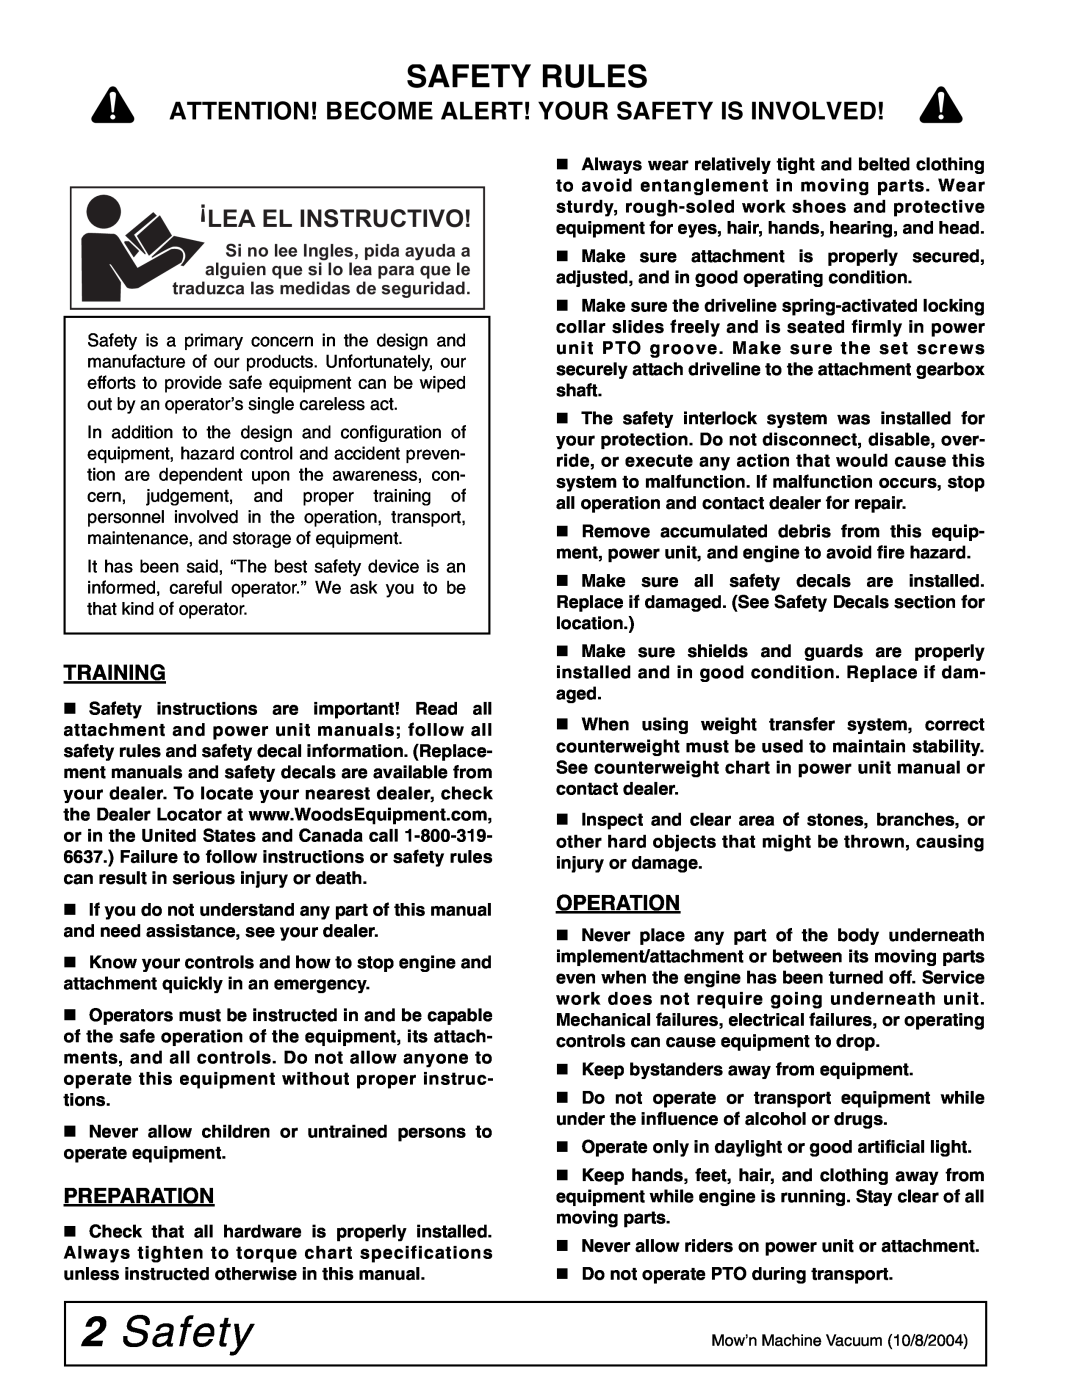 Woods Equipment FSW6000T manual Safety Rules, Attention! Become Alert! Your Safety Is Involved, Training, Preparation 